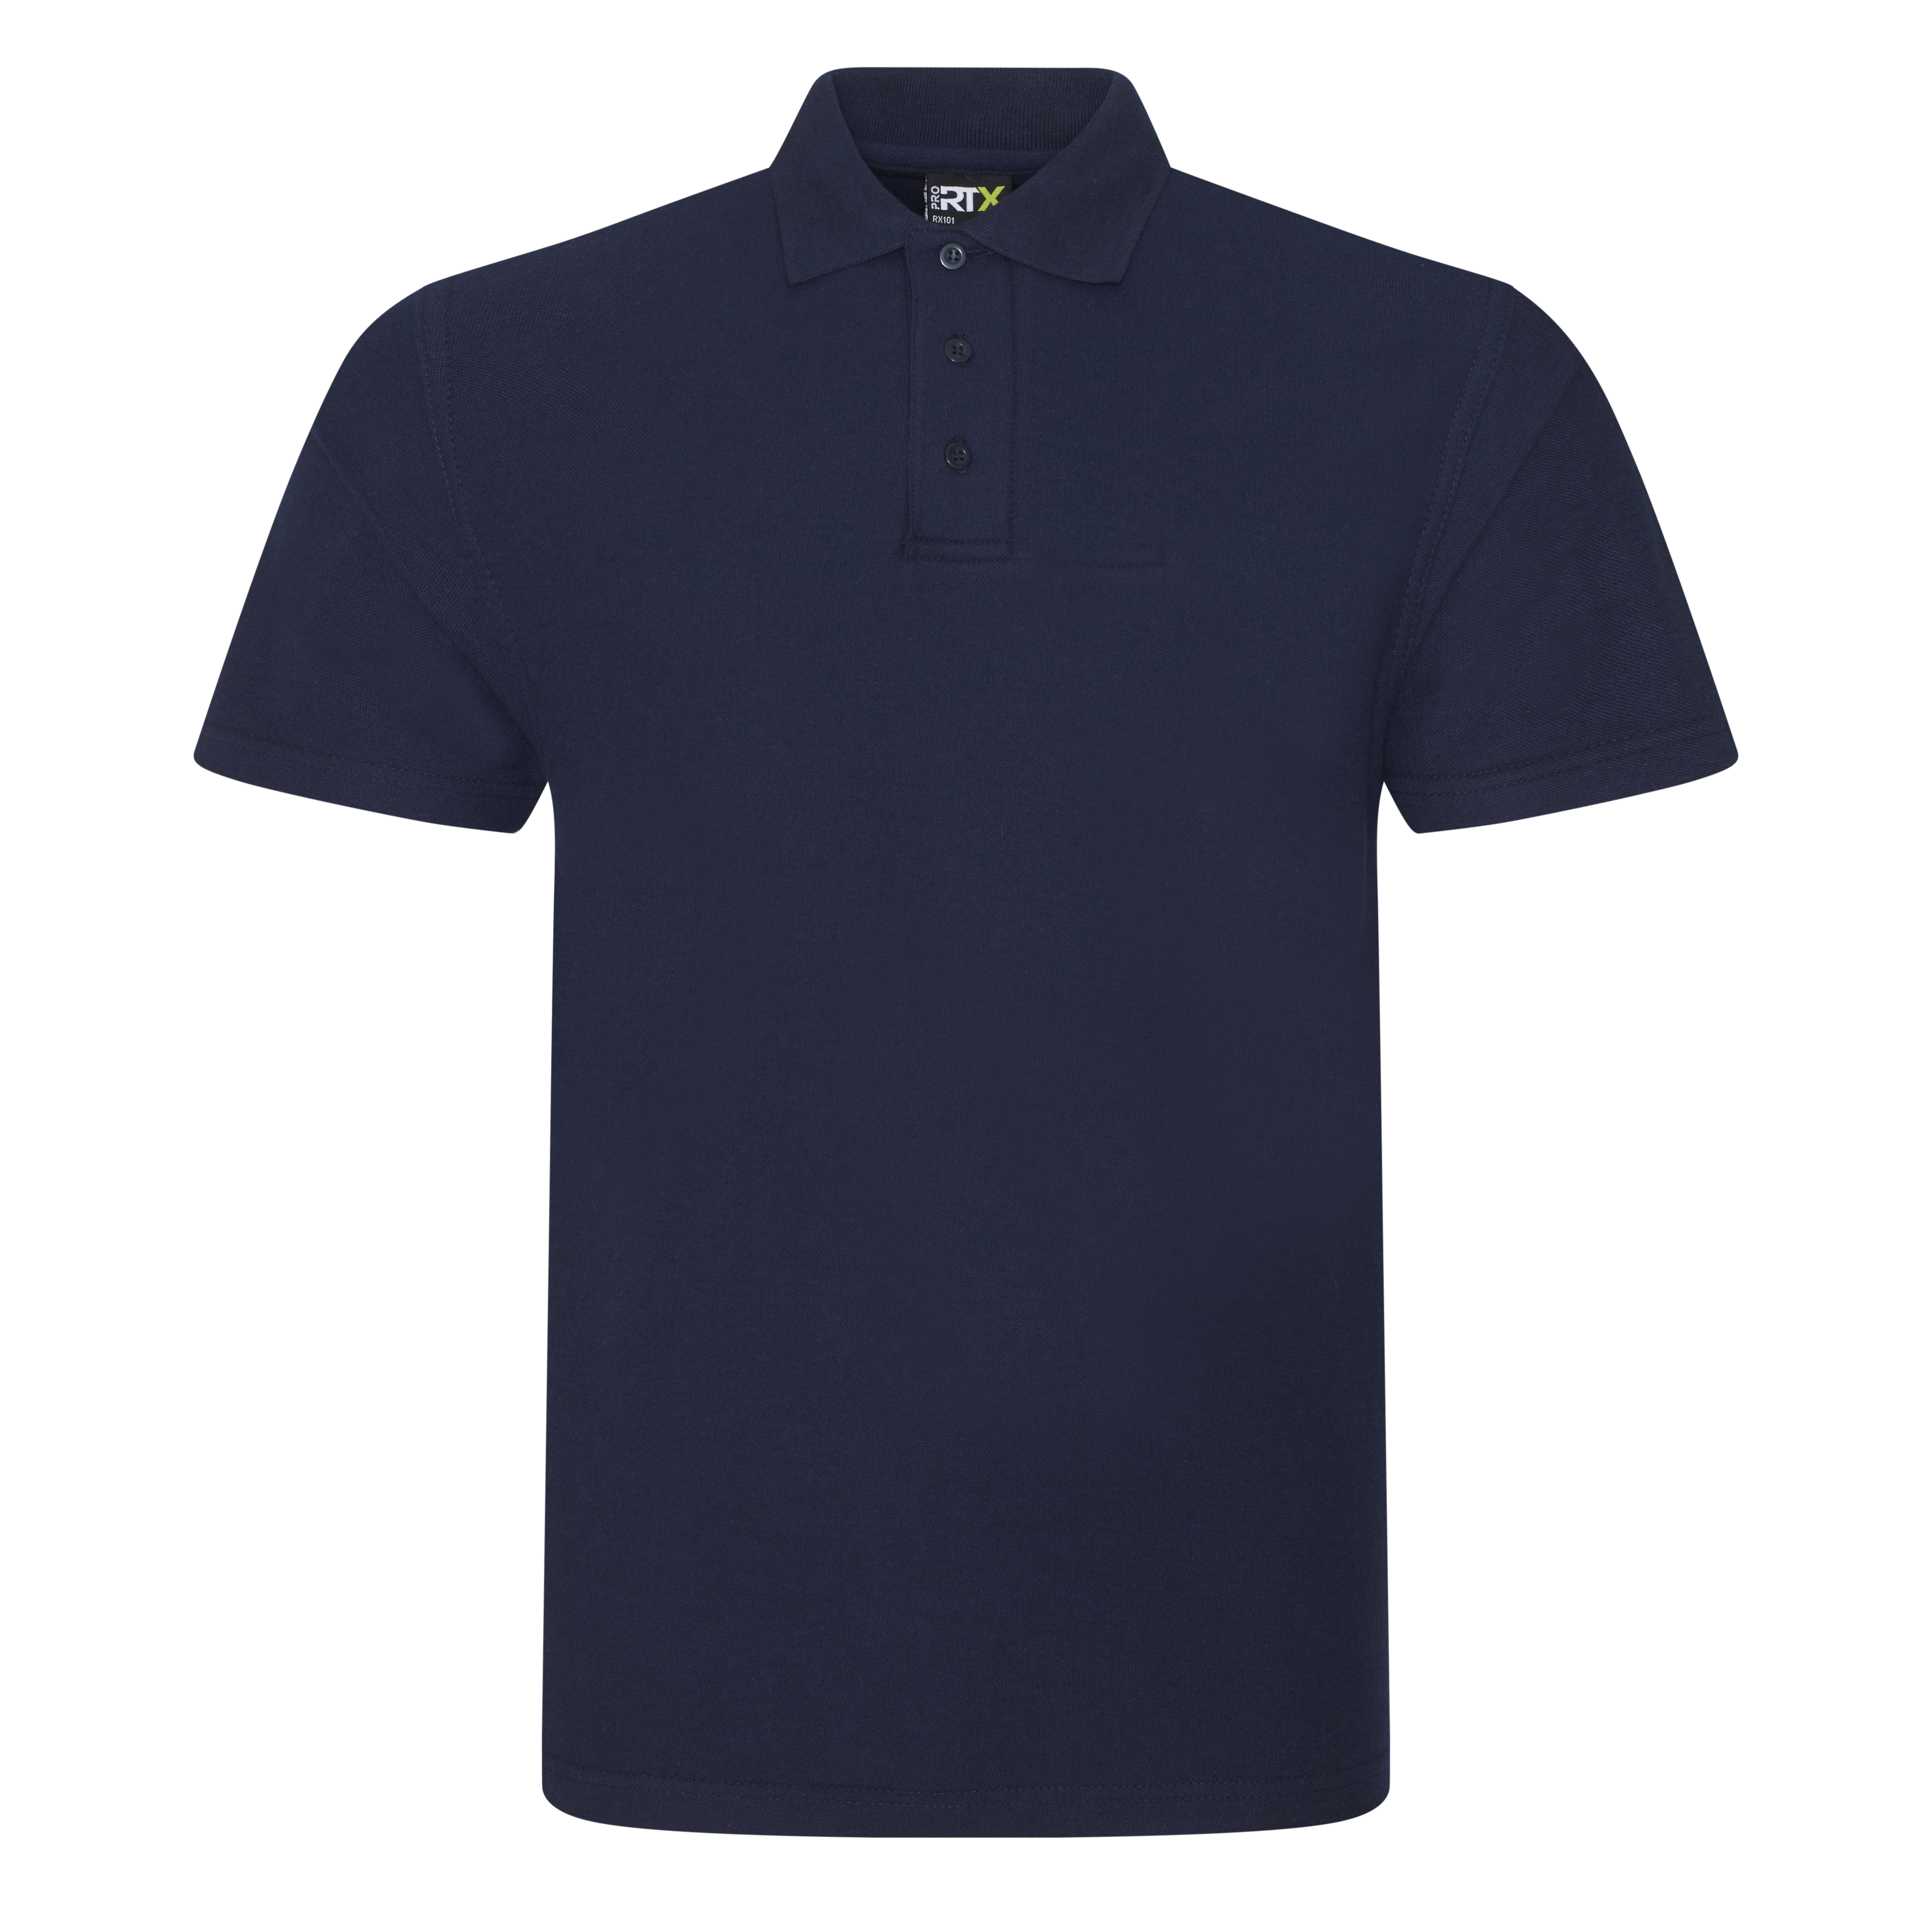 ax-httpswebsystems.s3.amazonaws.comtmp_for_downloadpro-polo-navy.jpg